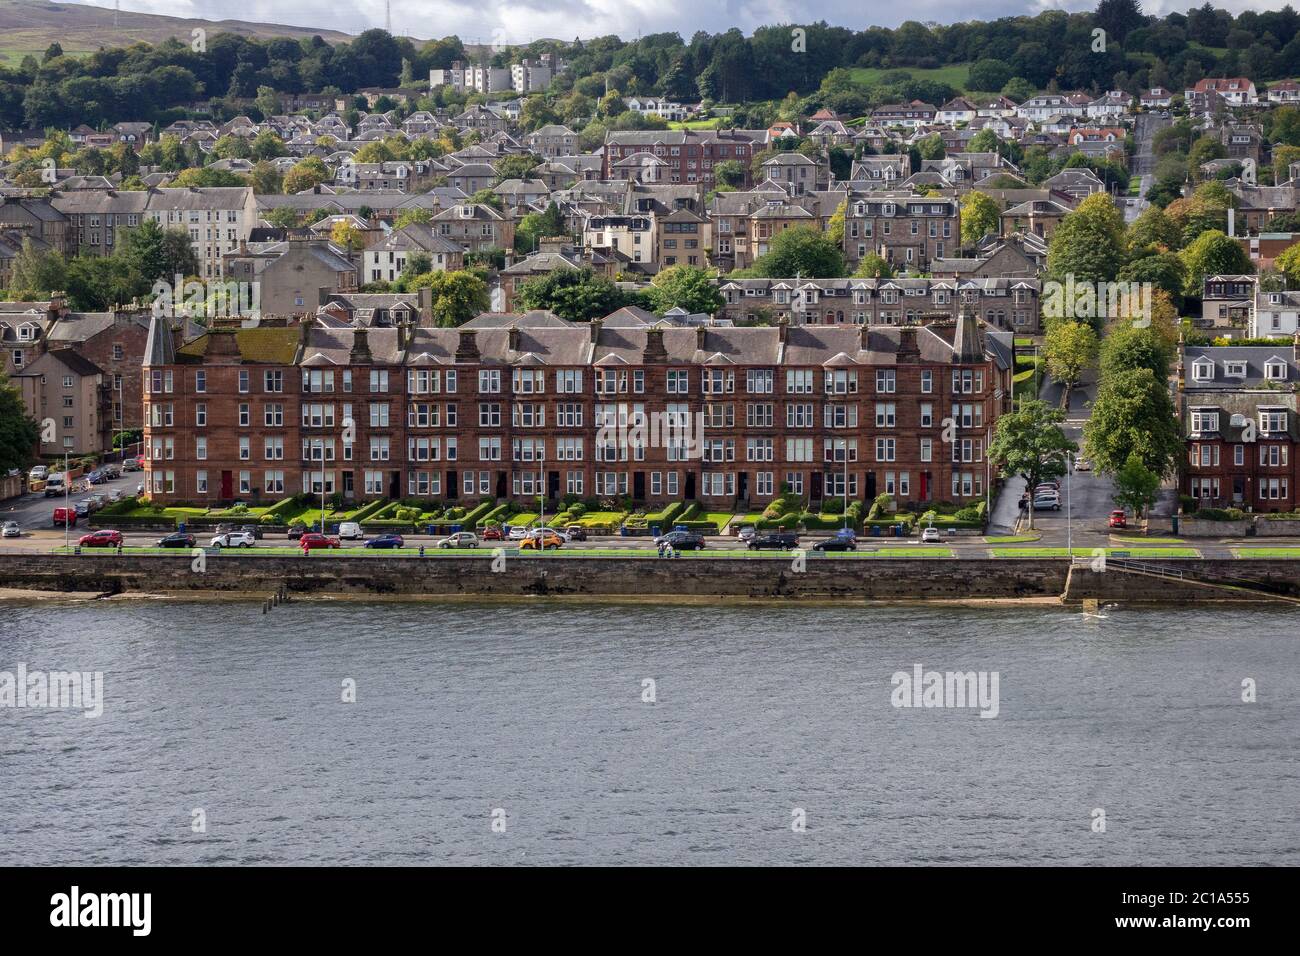 Houses On The Esplanade Waterfront In Greenock Scotland Aerial View Stock Photo